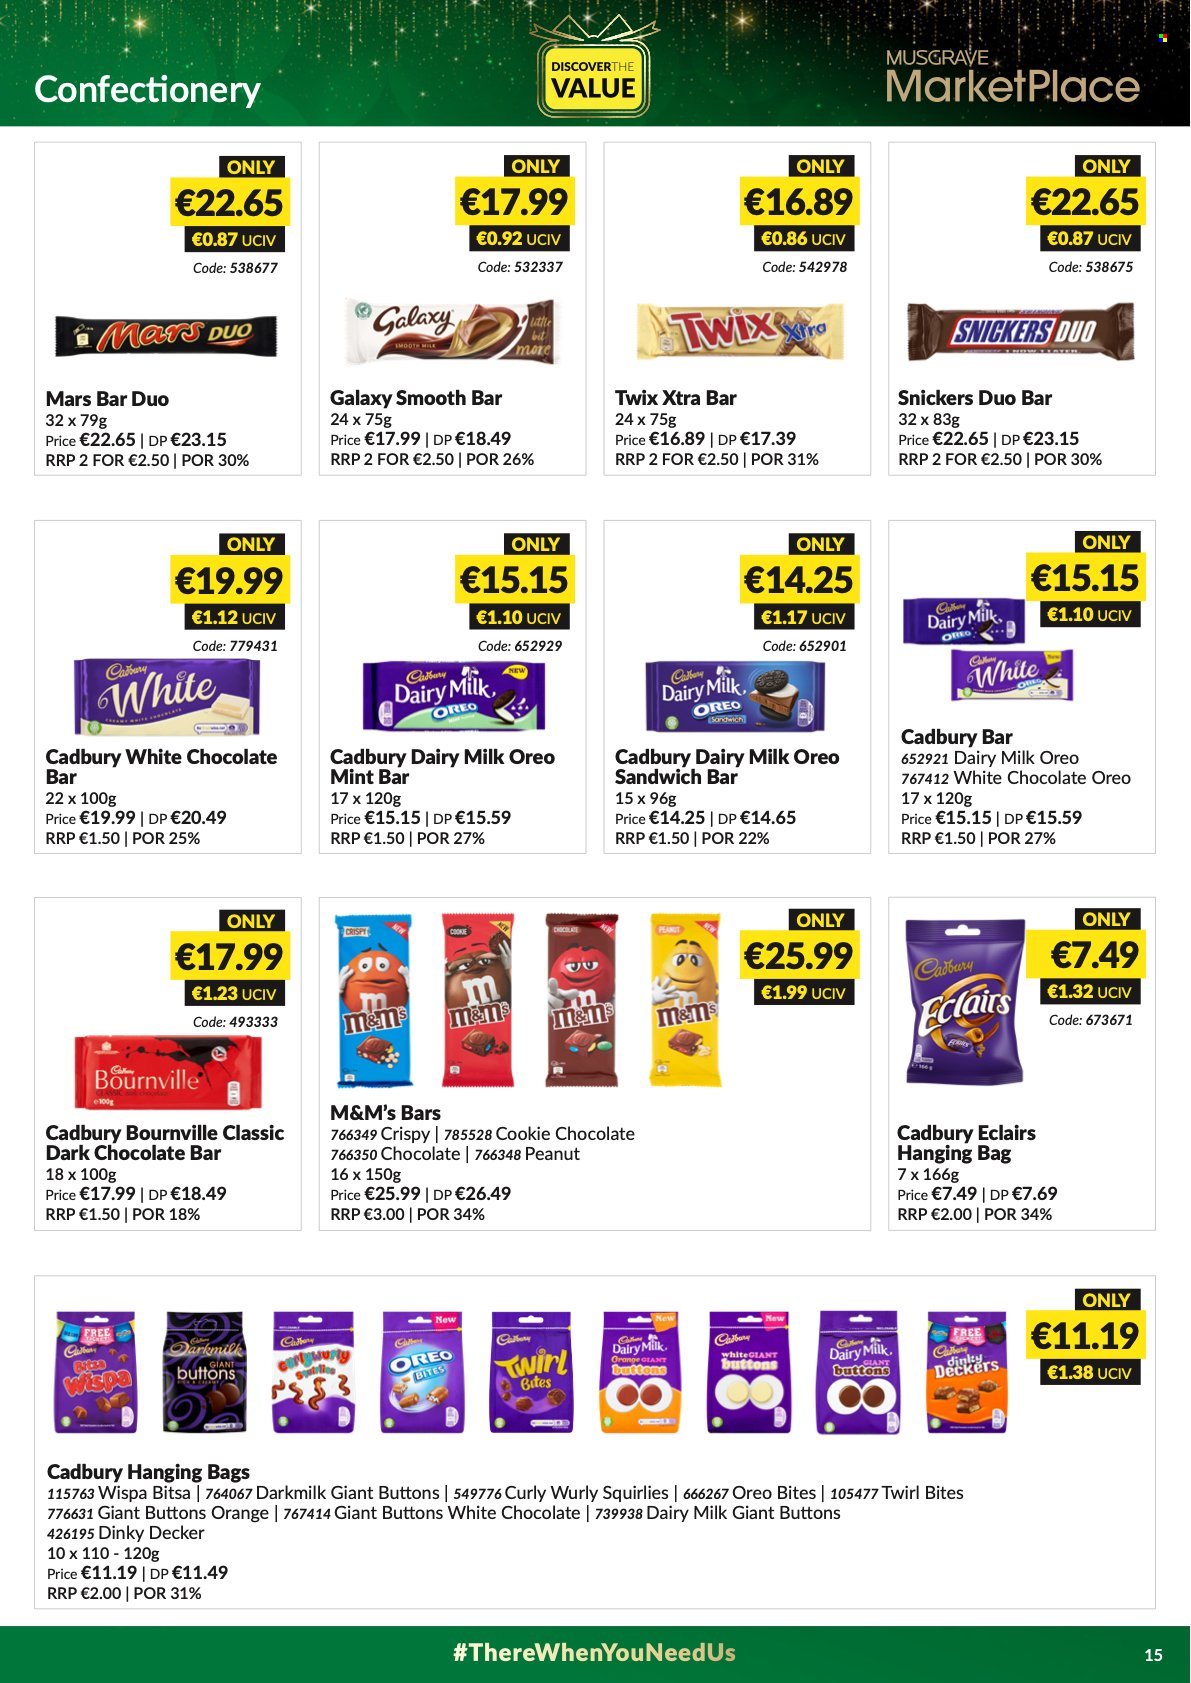 thumbnail - MUSGRAVE Market Place offer  - 21.11.2021 - 25.12.2021 - Sales products - oranges, sandwich, Oreo, Snickers, Twix, Mars, M&M's, dark chocolate, Cadbury, Dairy Milk, chocolate bar, XTRA. Page 15.